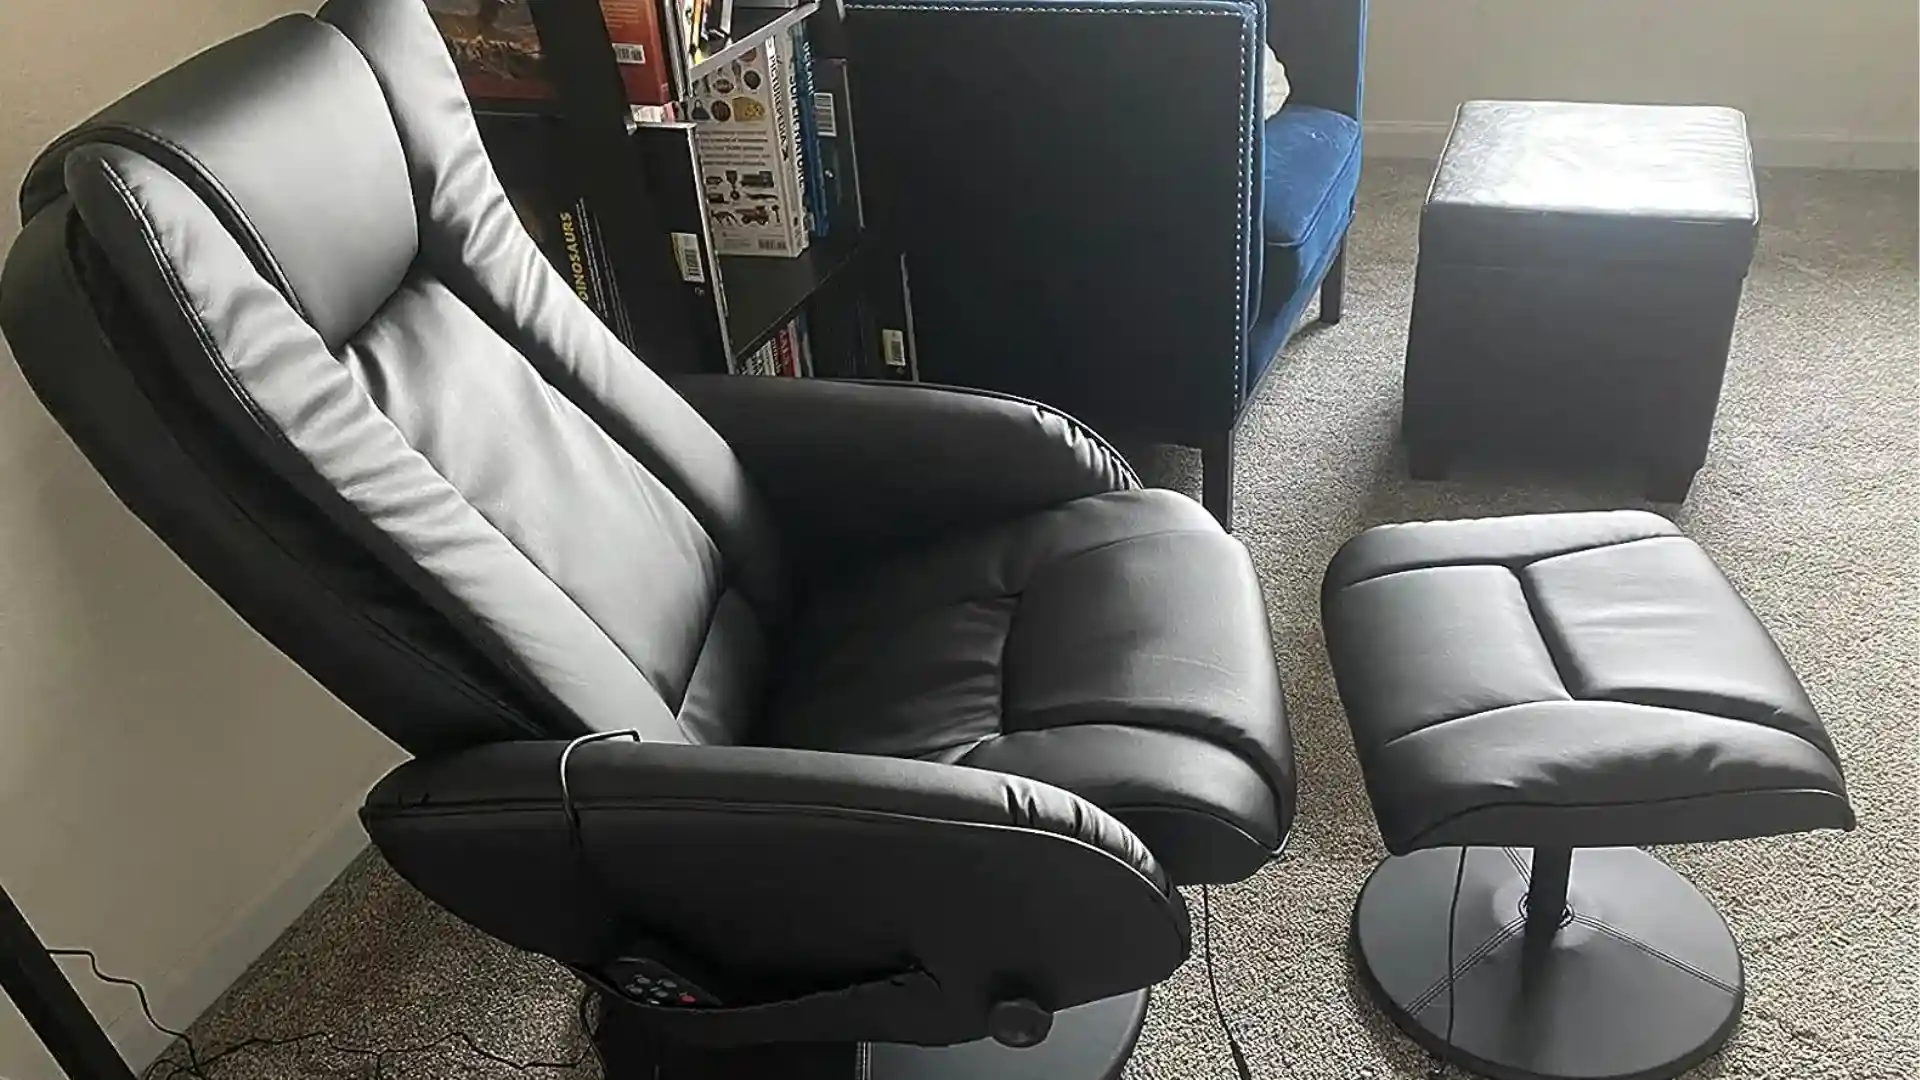 Faux Leather Electric Massage Recliner Chair